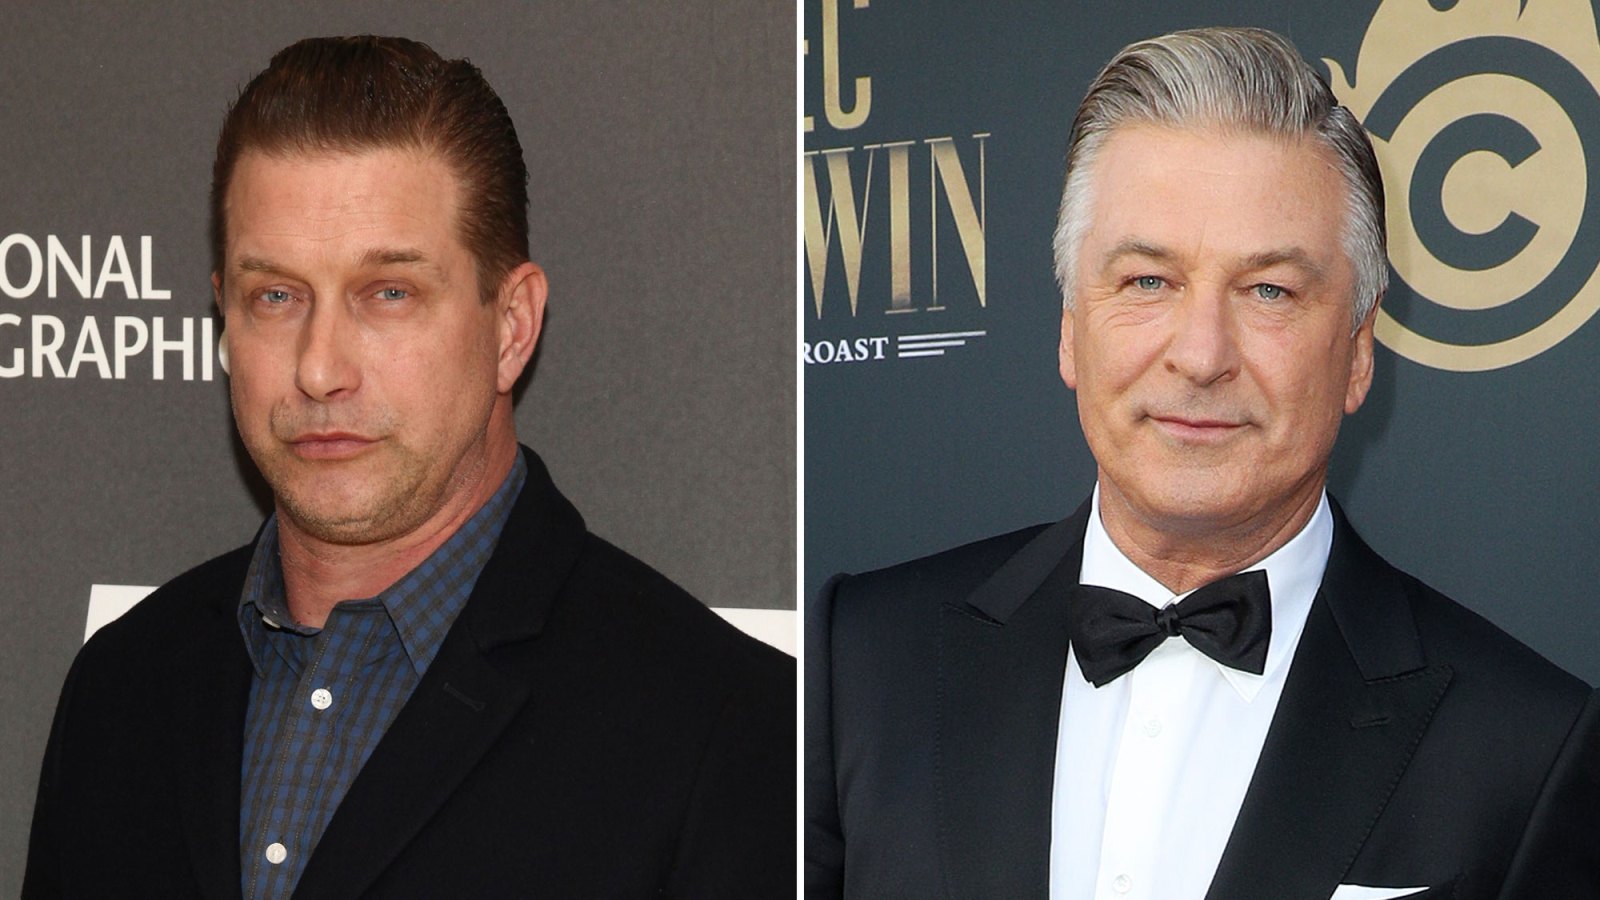 Stephen Baldwin Asks for Prayers After Brother Alecs Prop Gun Misfire Not Much Can Be Said